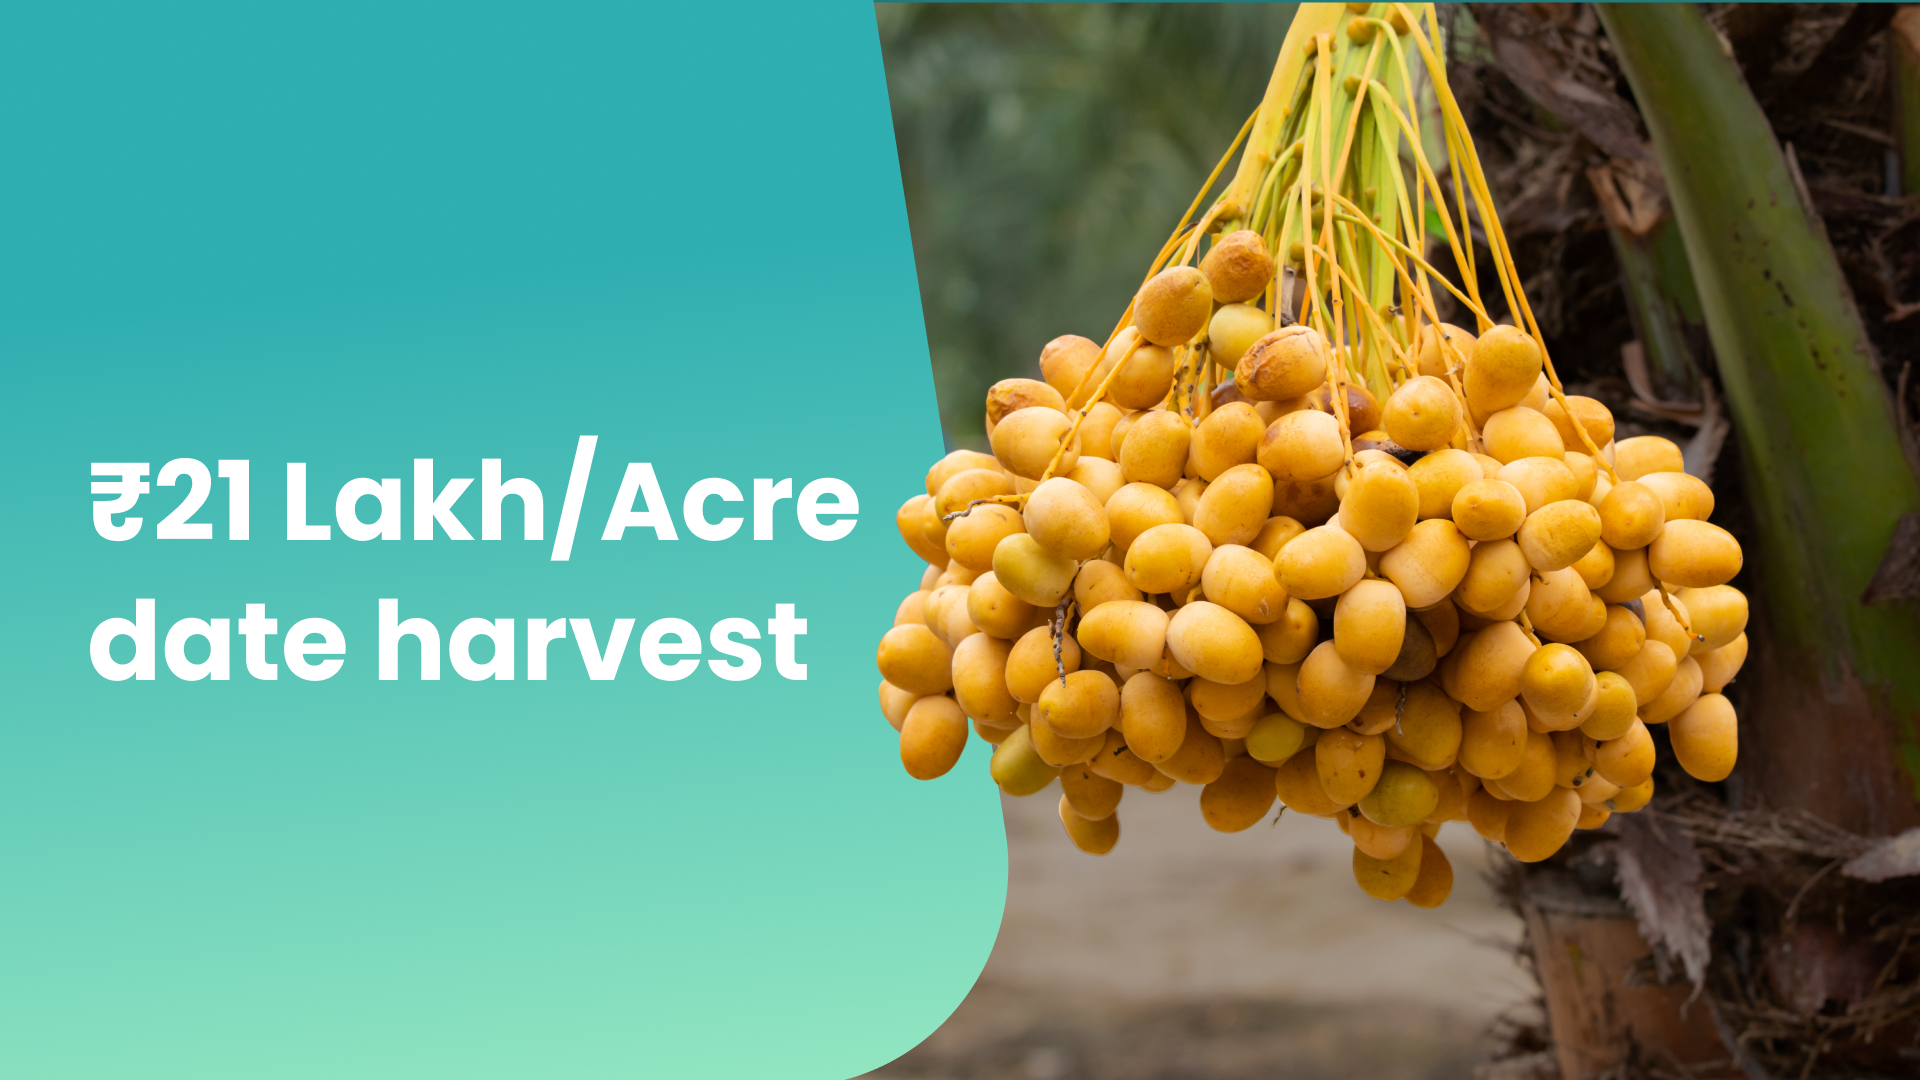 Course Trailer: Earn ₹21 Lakh per Acre with Dates Farming. Watch to know more.